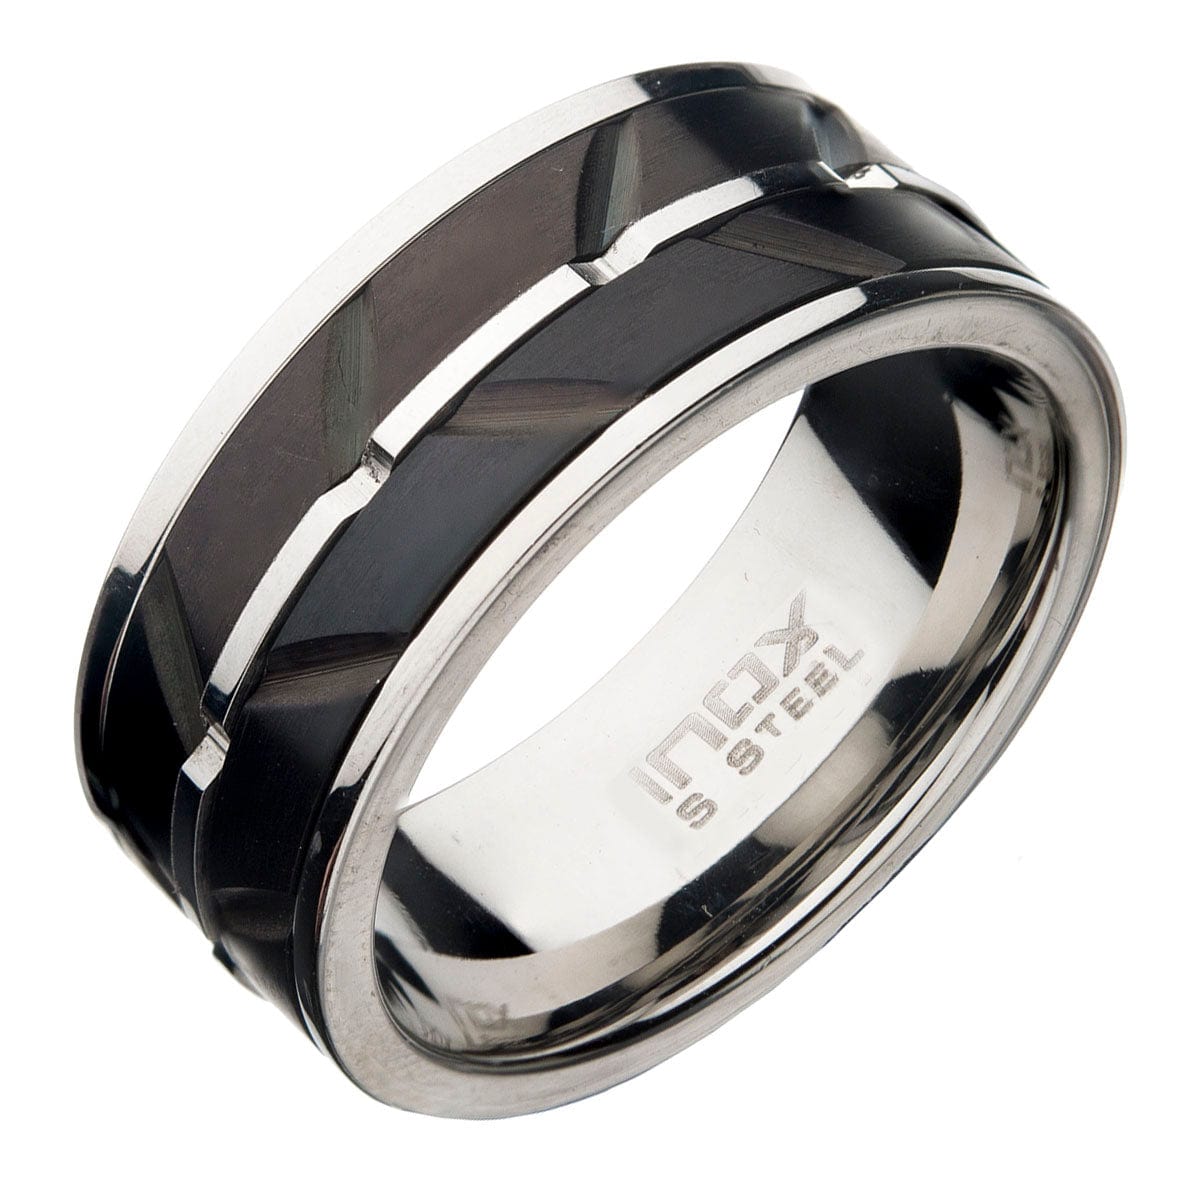 INOX JEWELRY Rings Black and Silver Tone Stainless Steel Matte Finish Raised Wave Accent Inlaid Band Ring